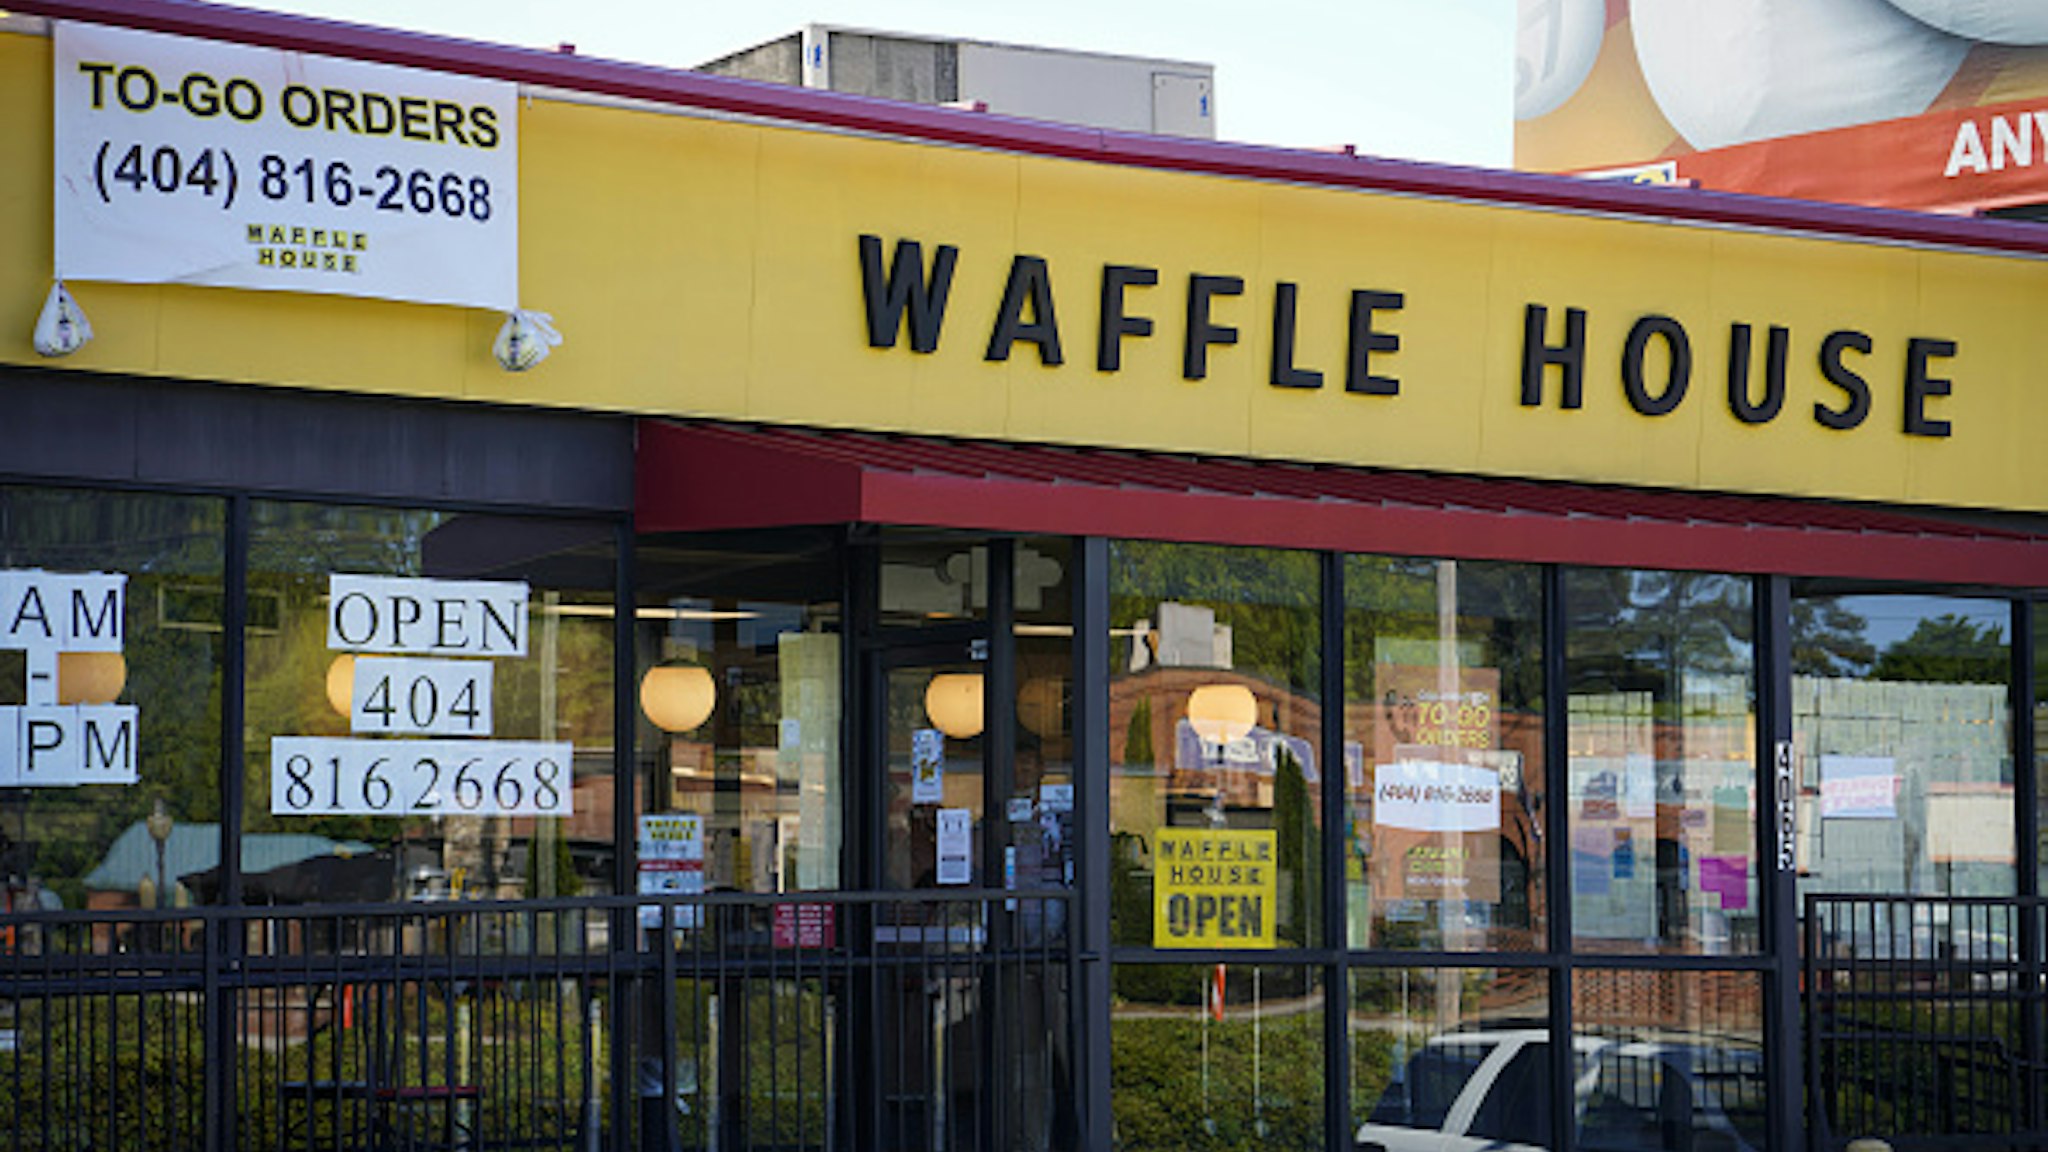 An "Open" sign hangs in the window of a Waffle House Inc. restaurant in Brookhaven, Georgia, U.S., on Monday, April 27, 2020. After closing more than 400 locations across the U.S. last month due to the coronavirus outbreak, the chain thats barely flinched during hurricane season is preparing for its biggest test yet.